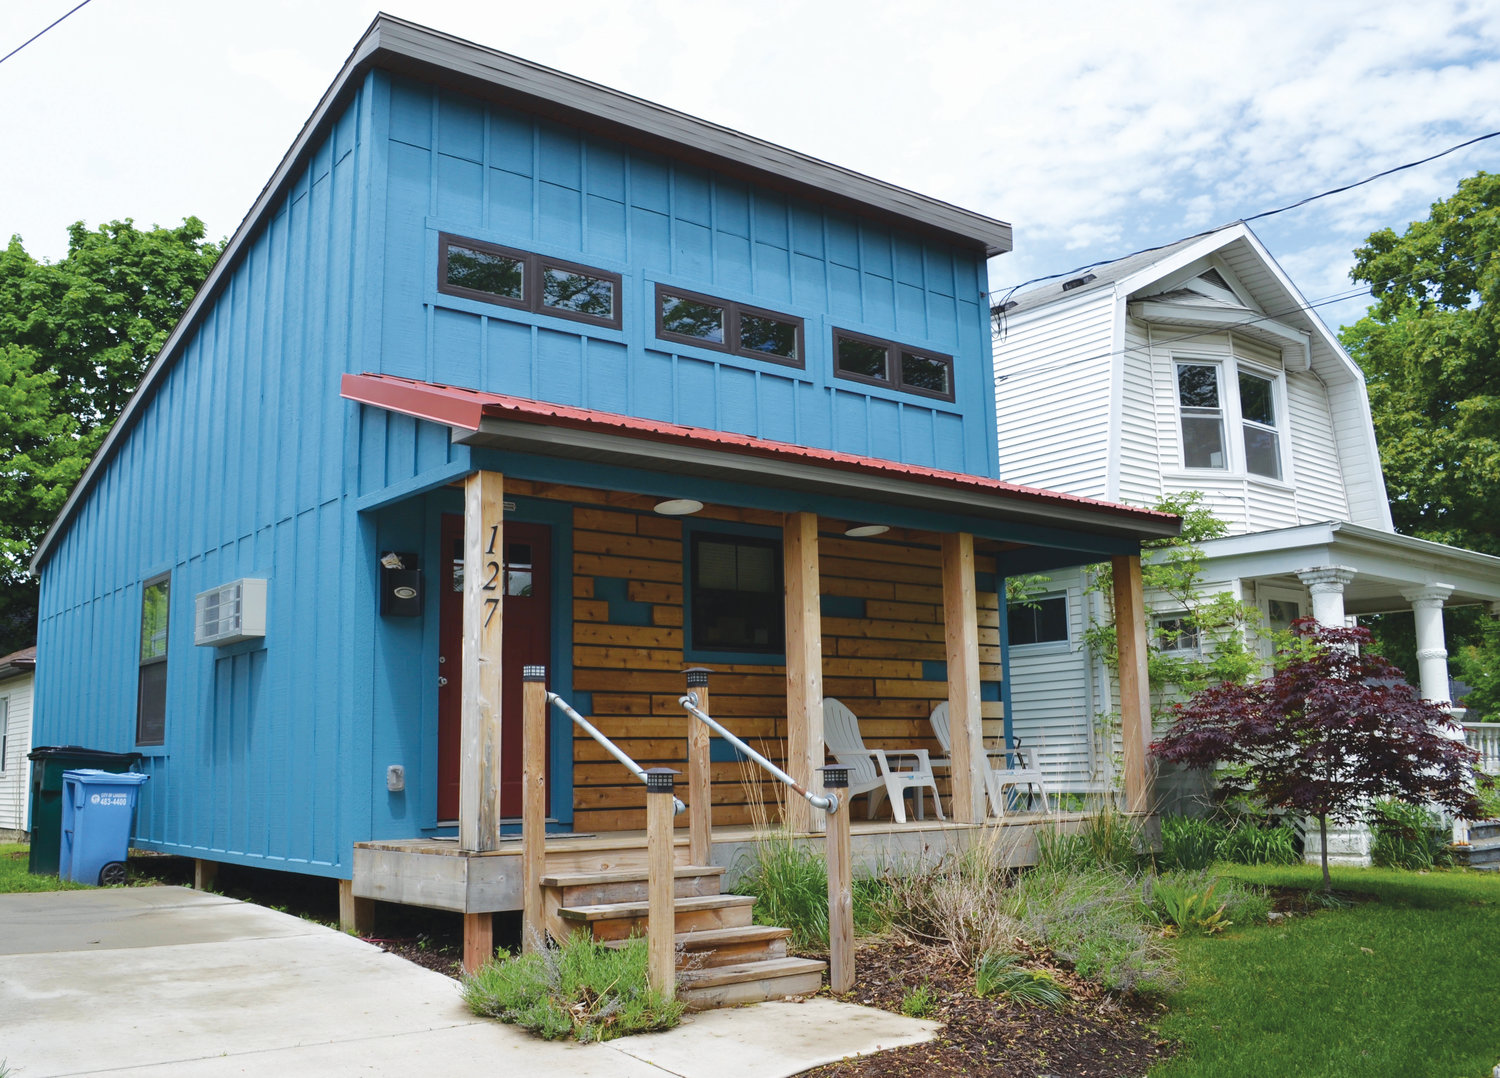 Developer Brent Forsberg is eager to tap further into the smaller-home market in Lansing after the successful construction of this 600-square-foot, one-bedroom home on Elm Street in REO Town.